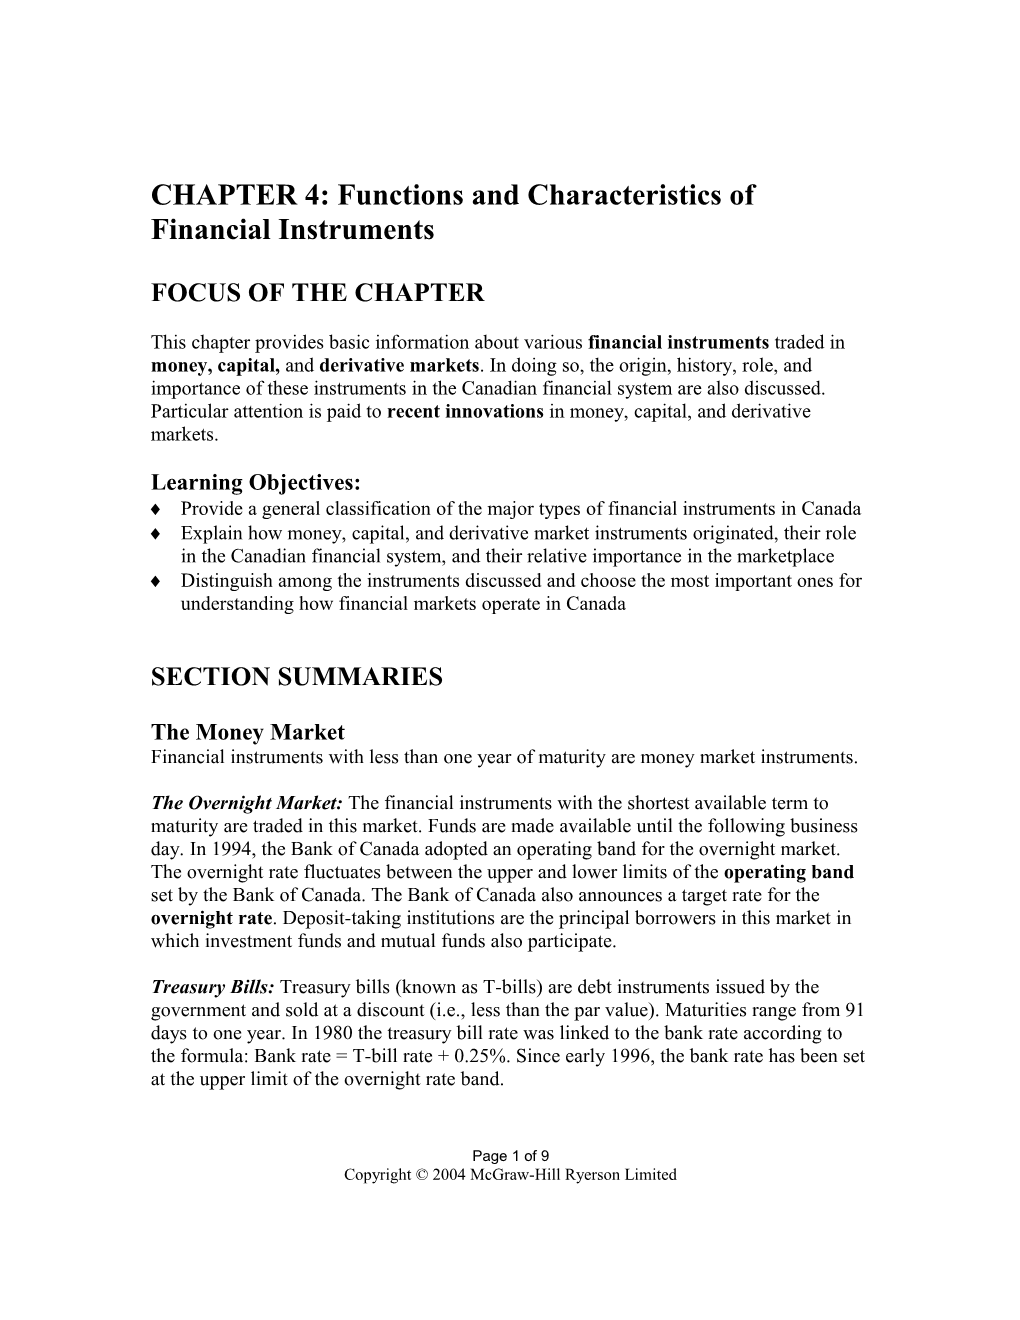 CHAPTER 4: Functions and Characteristics of Financial Instruments